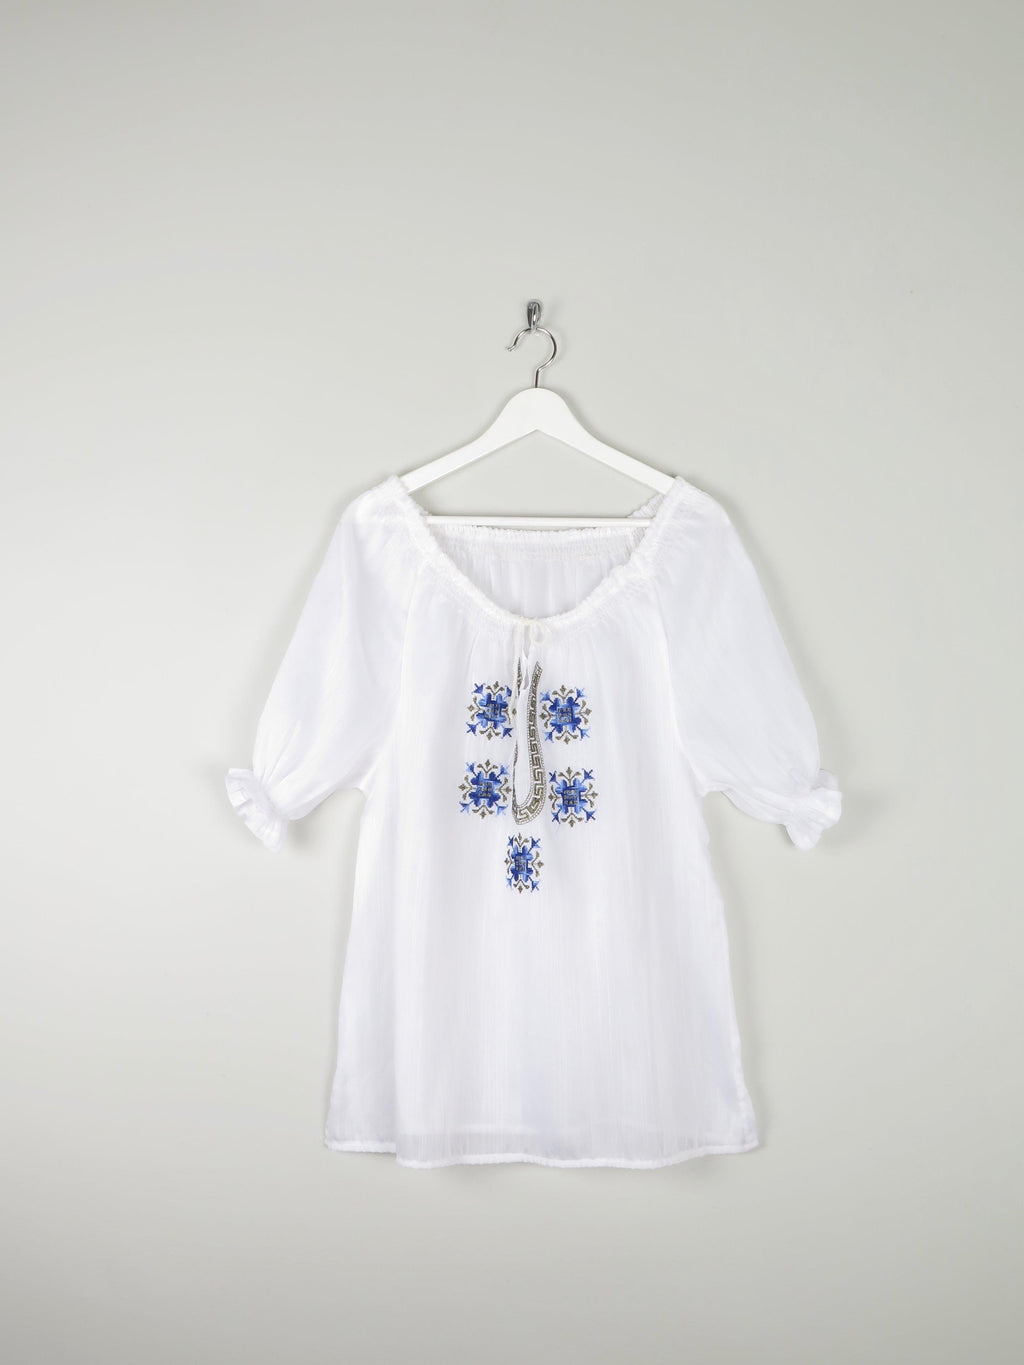 Women’s 1970s Folk Embroidered Blouse M/L - The Harlequin